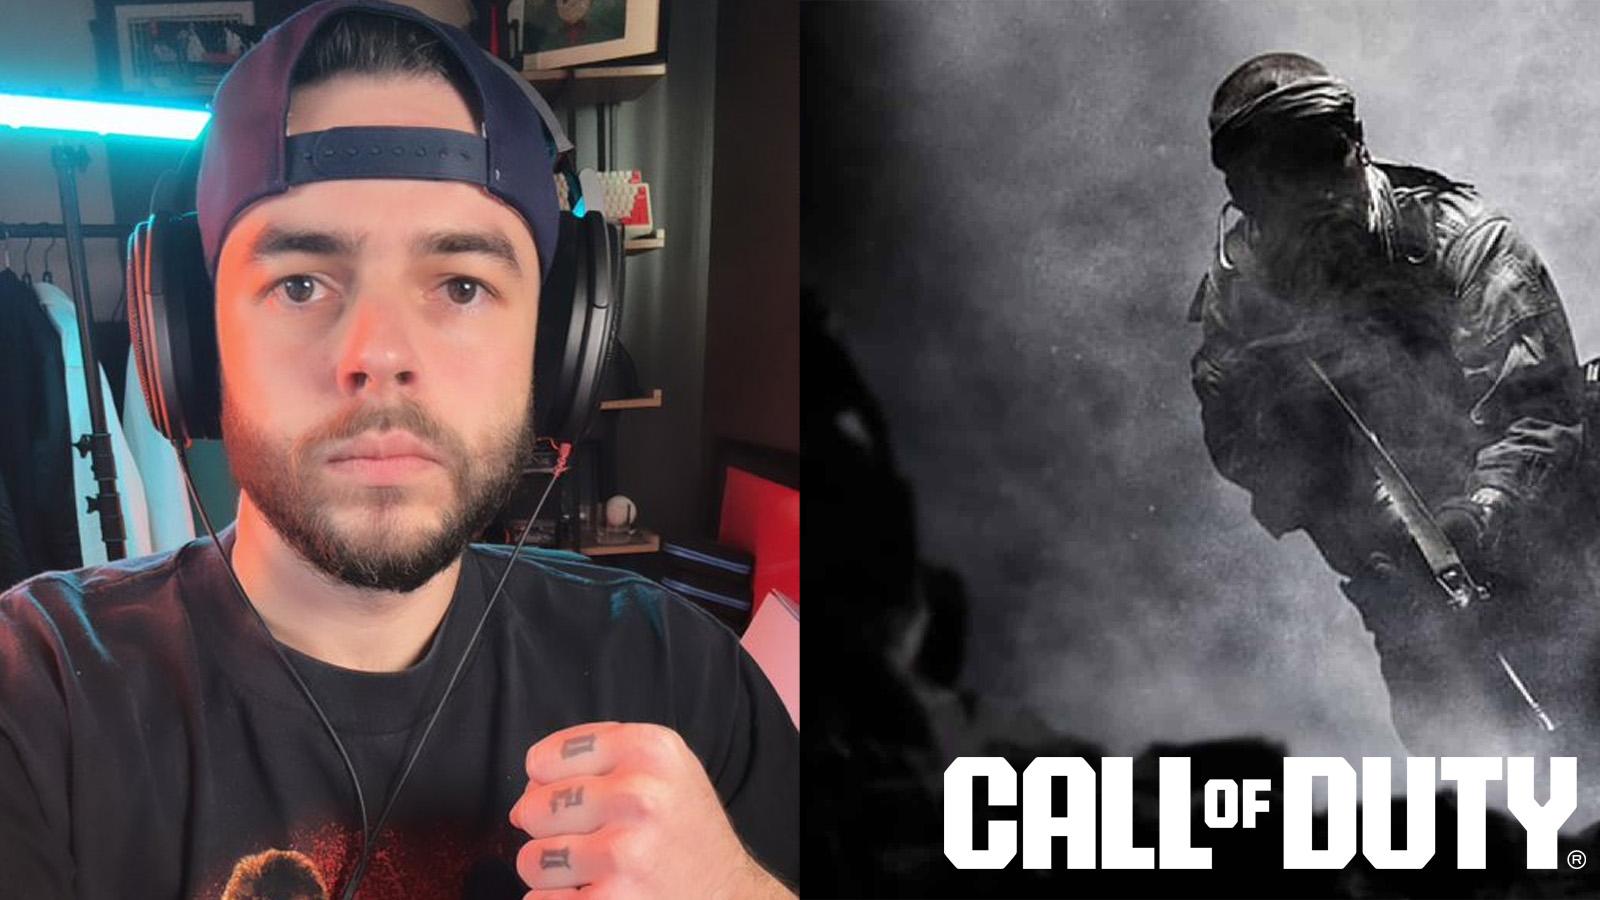 A picture of Nadeshot beside a piece of promotional art for Call of Duty